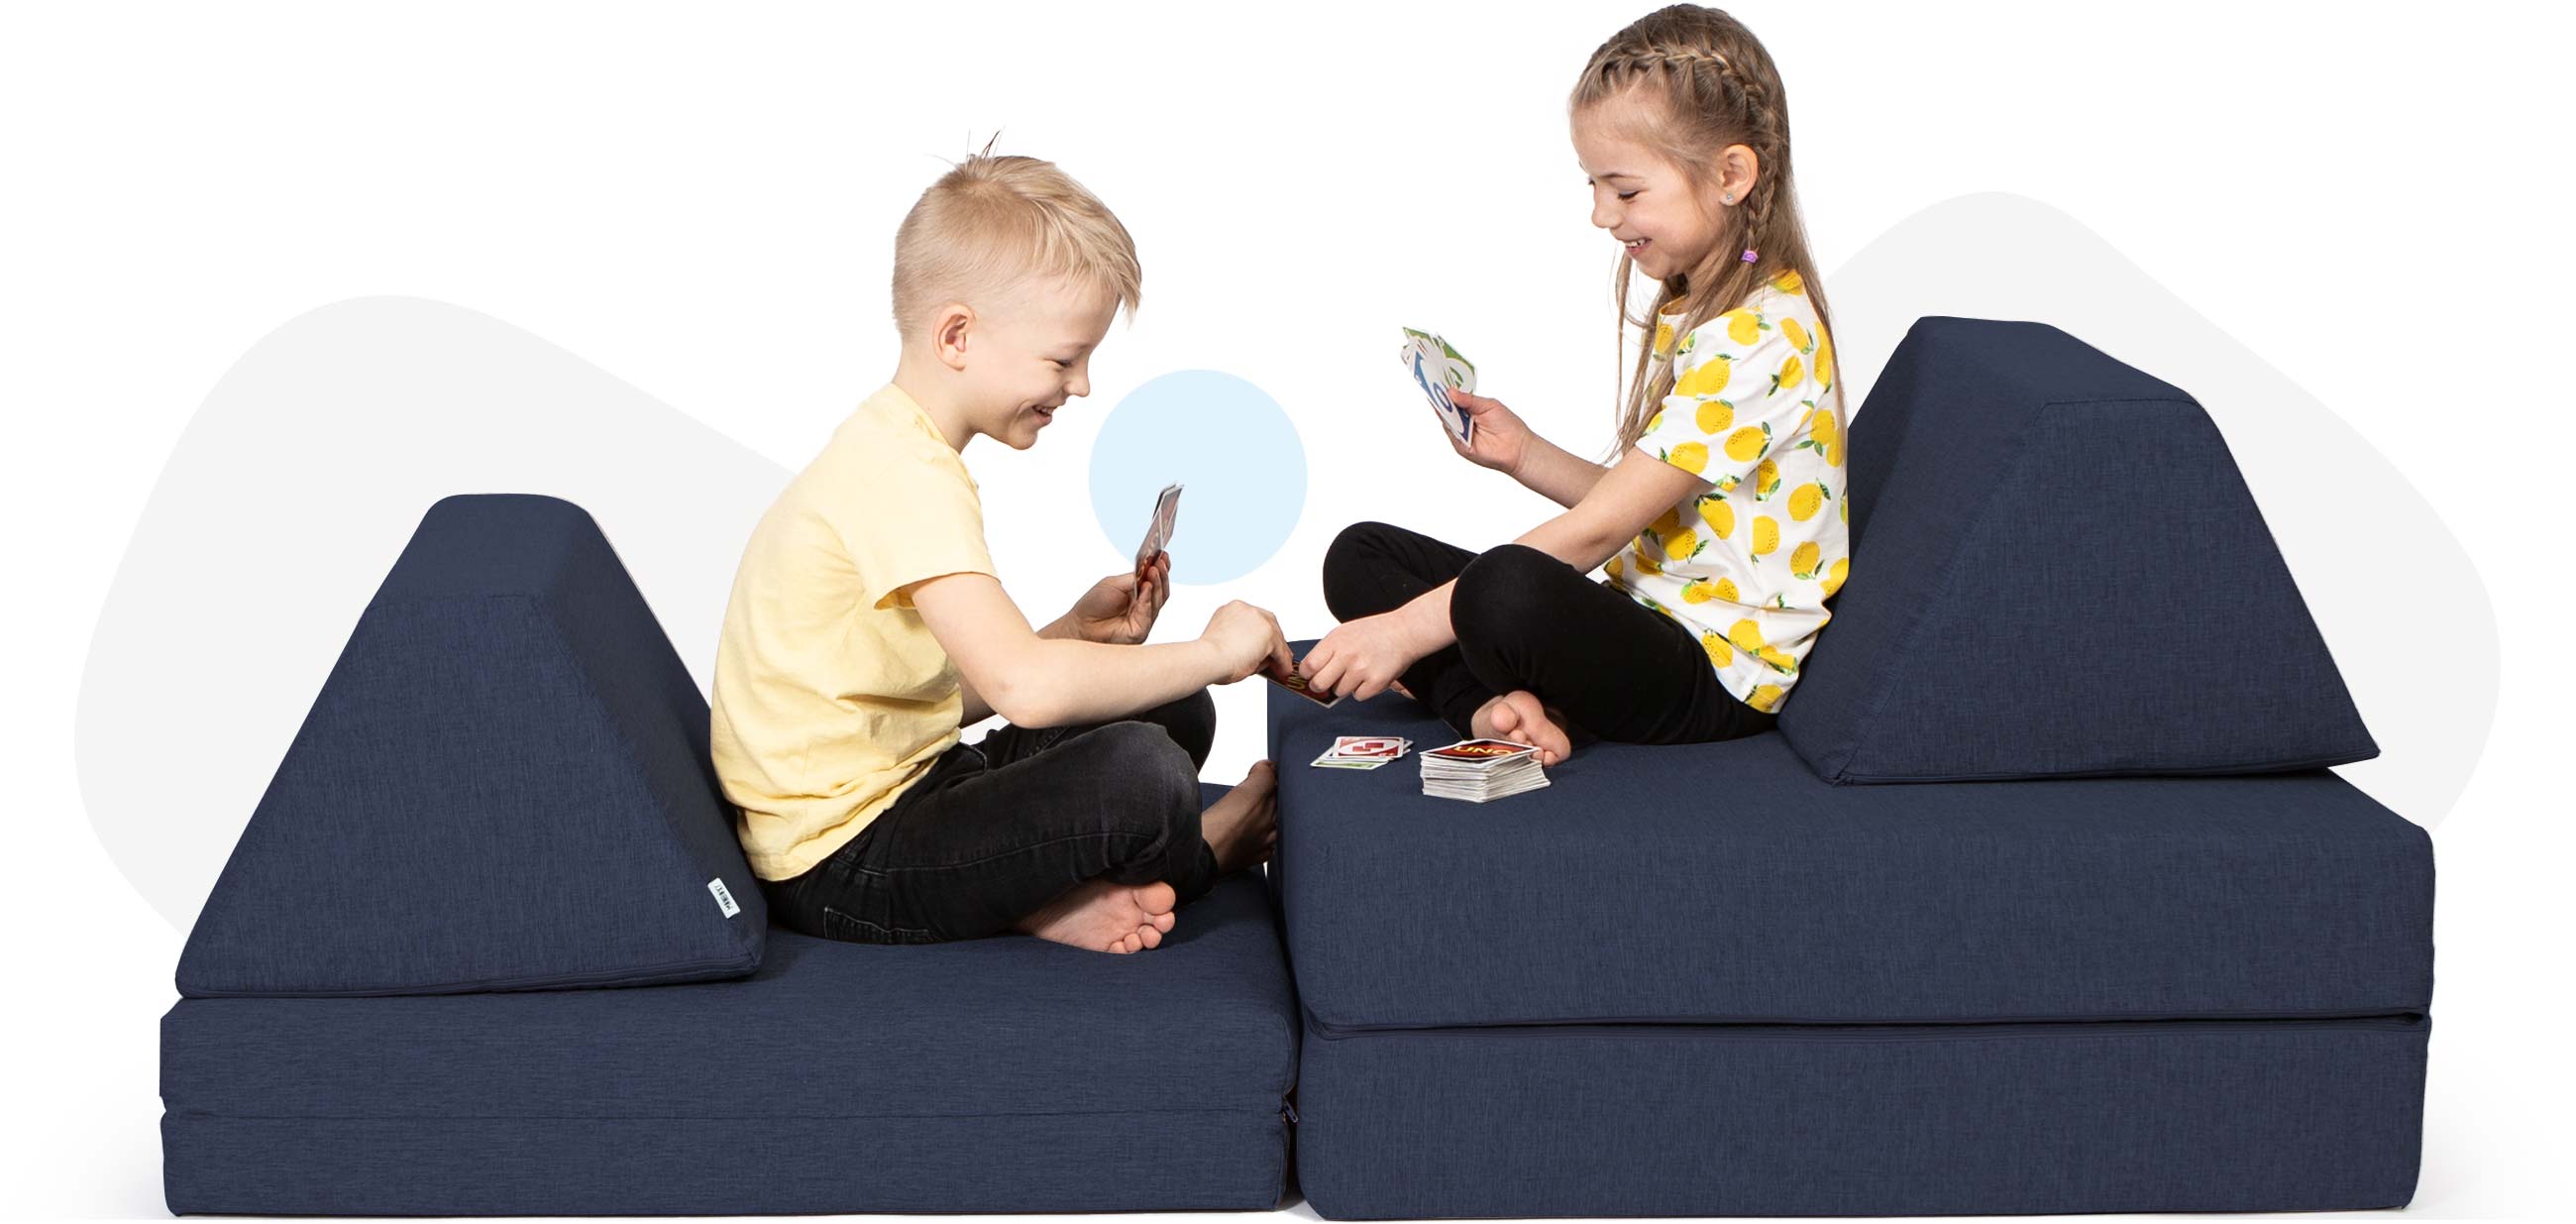 Kids sitting and playing cards on a navy blue Monboxy sofa mattress set